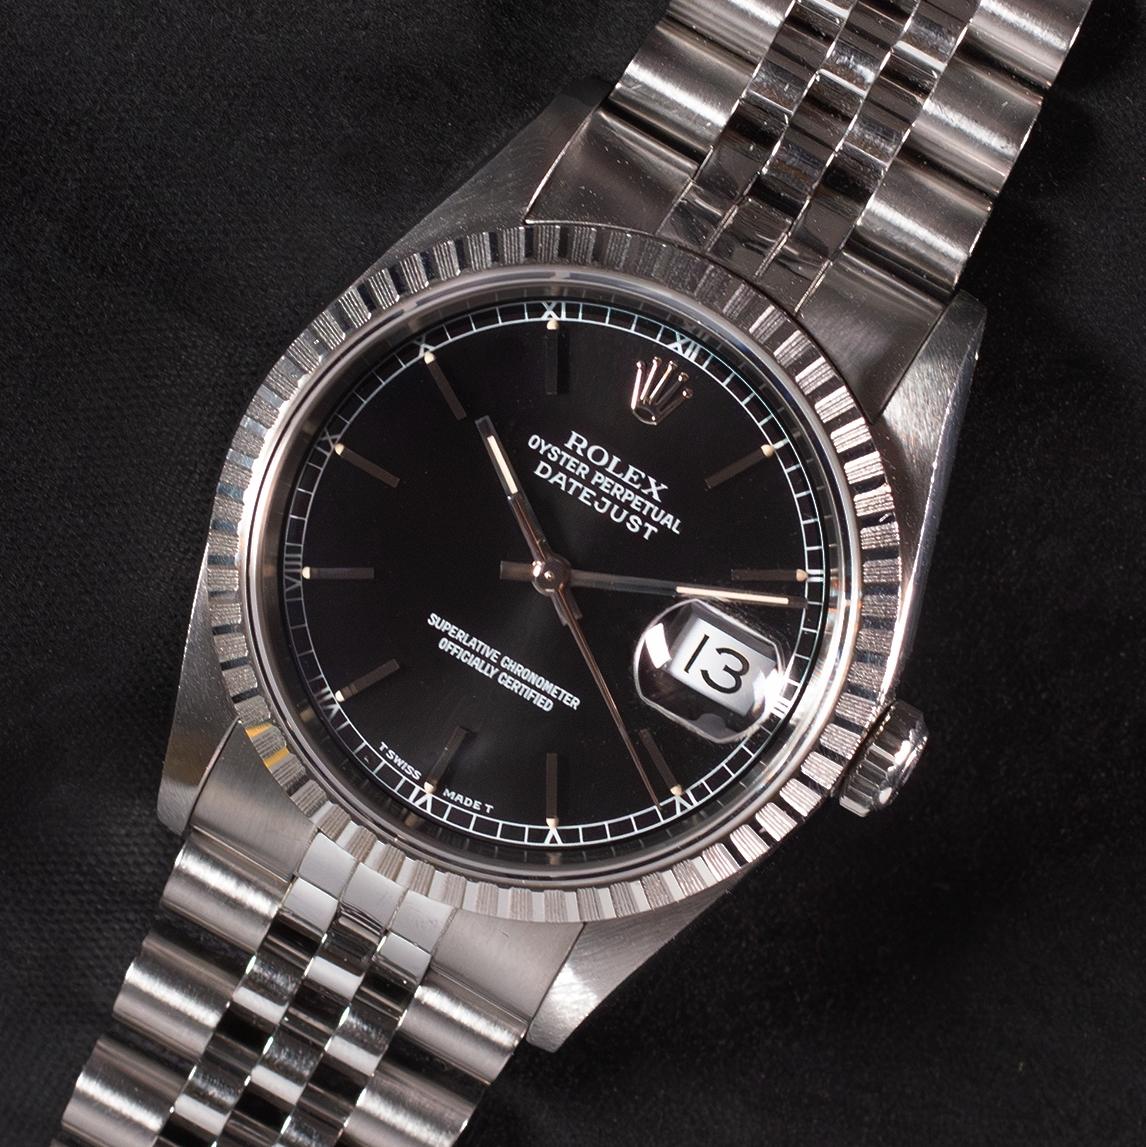 Brand: Vintage Rolex
Model: 16220
Year: 1993
Serial number: S4xxxxx
Reference: C03841

Case: 36mm Steel Case without crown; Show sign of wear with slight polish from previous; inner case back stamped 16200

Dial: Excellent Condition Black Dial; the